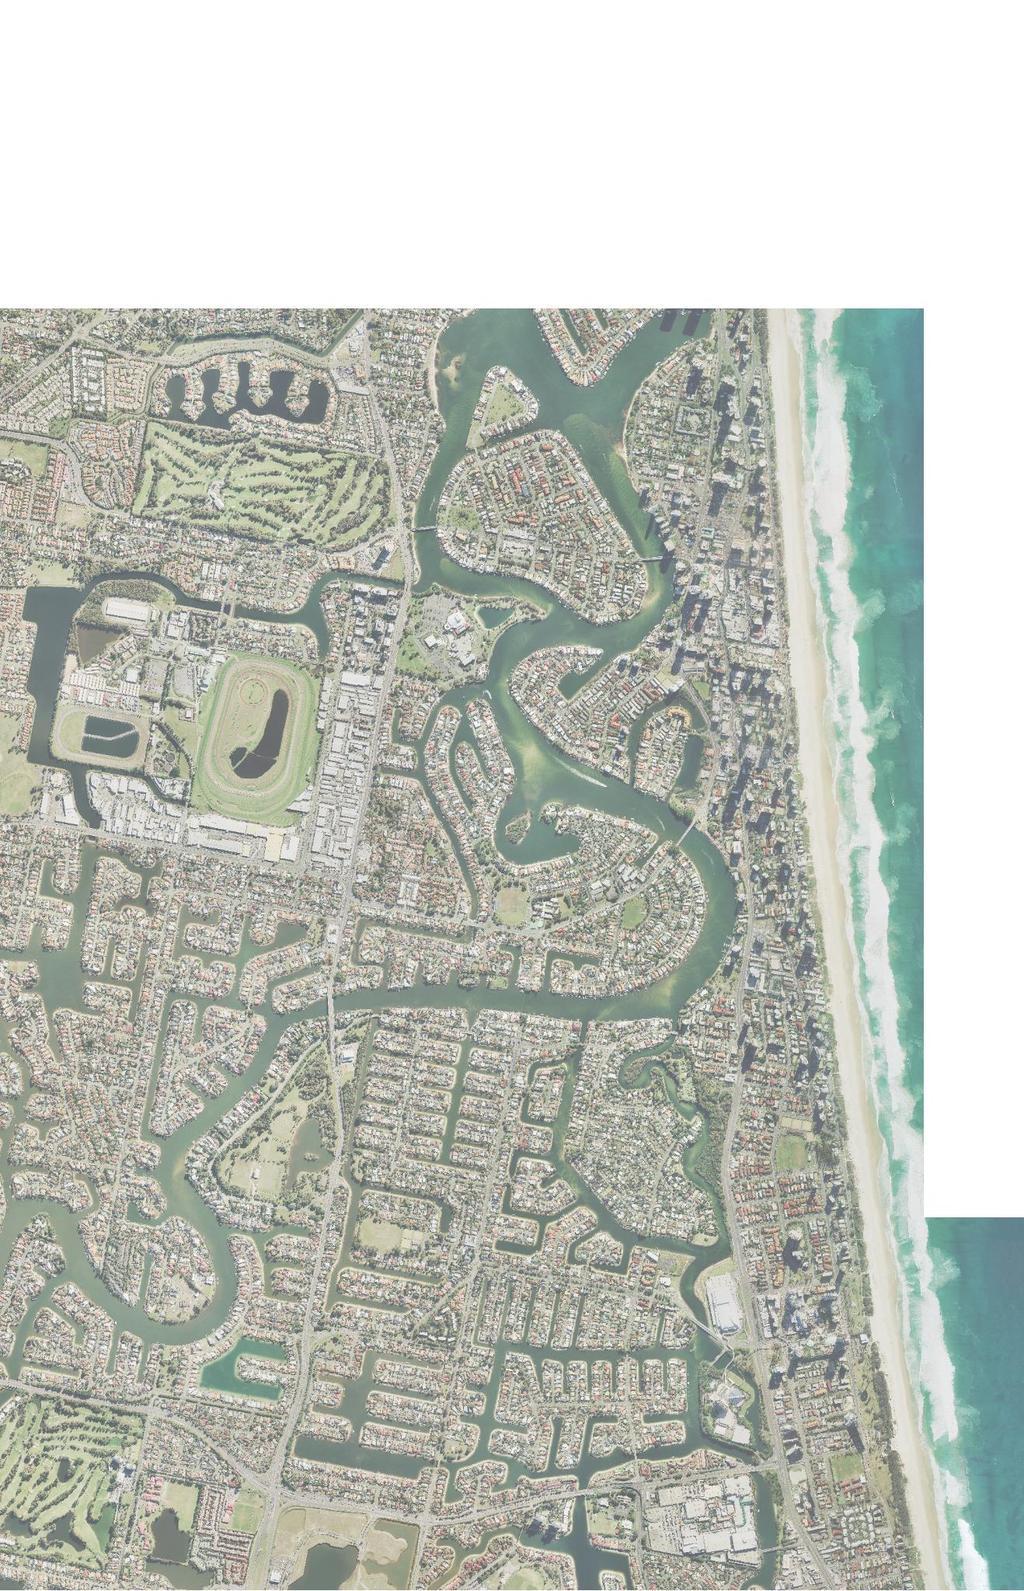 AVENUE CYPRESS AVENUE 6903000 Local Connector Road Contaminated Properties EMR Listings Petroleum product or oil storage Service stations BENOWA SURFERS PARADISE CAVILL AVENUE Waste storage,